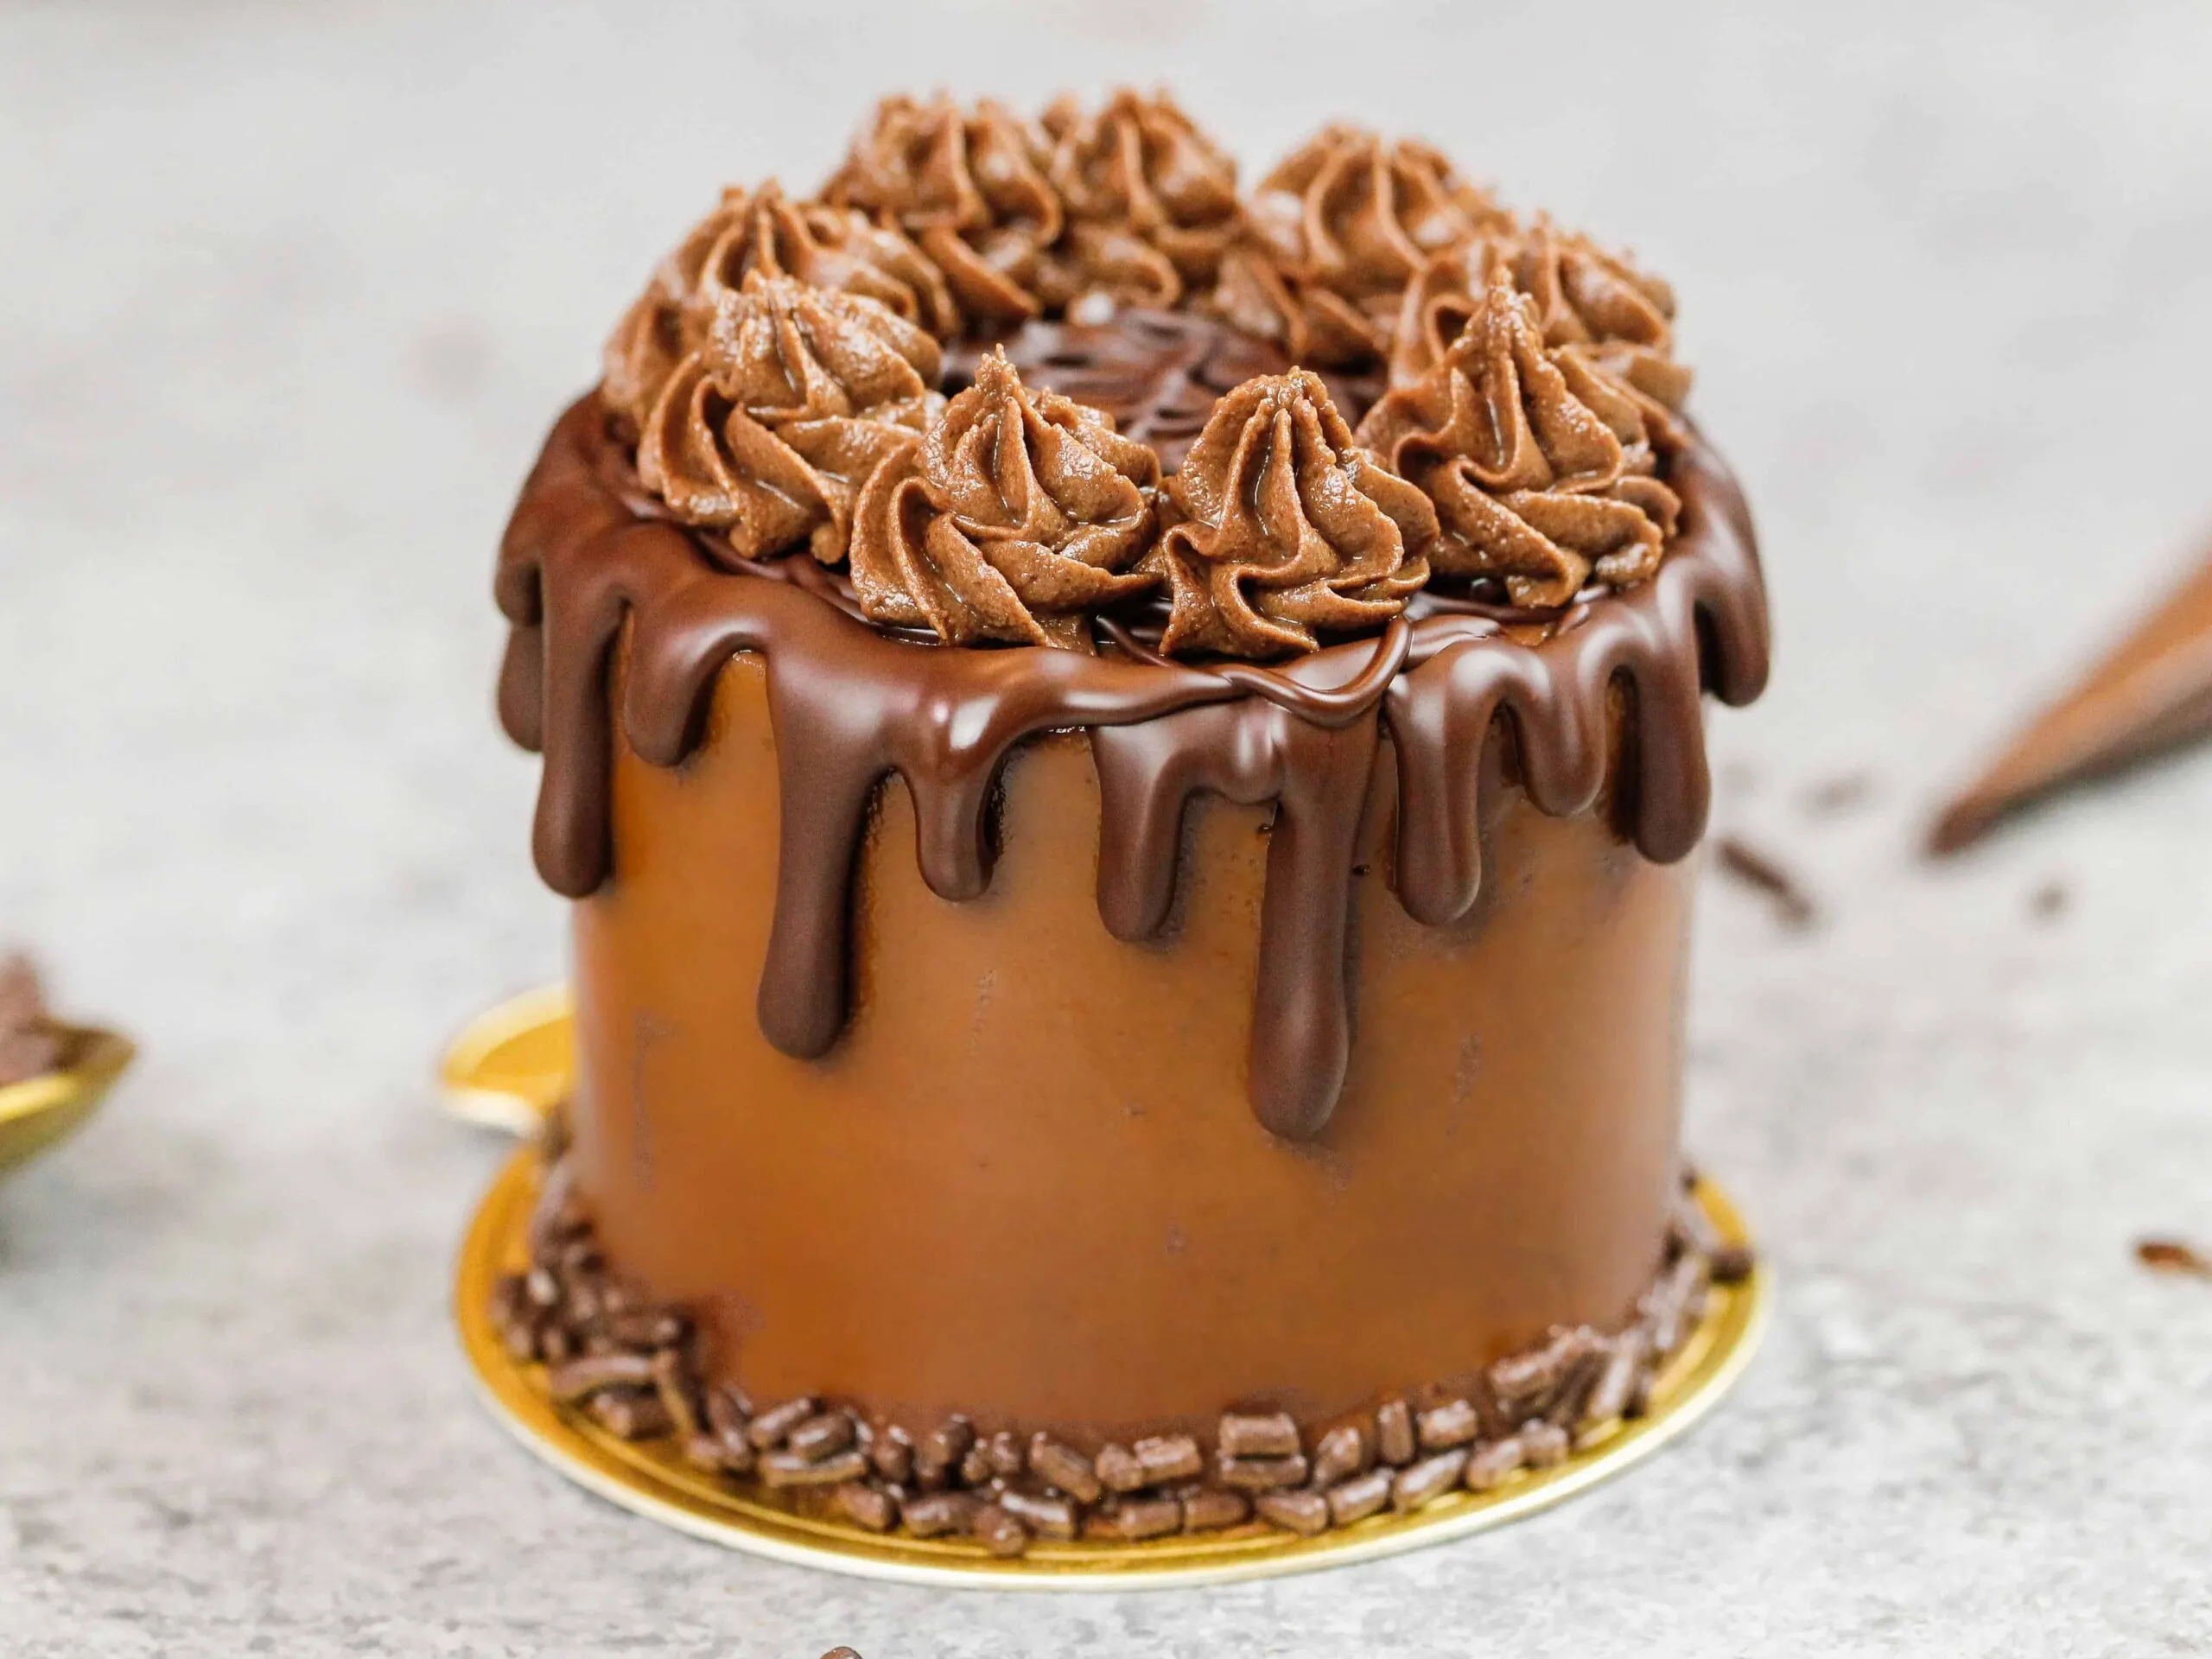 image of a mini chocolate cake made with 3-inch cake layers